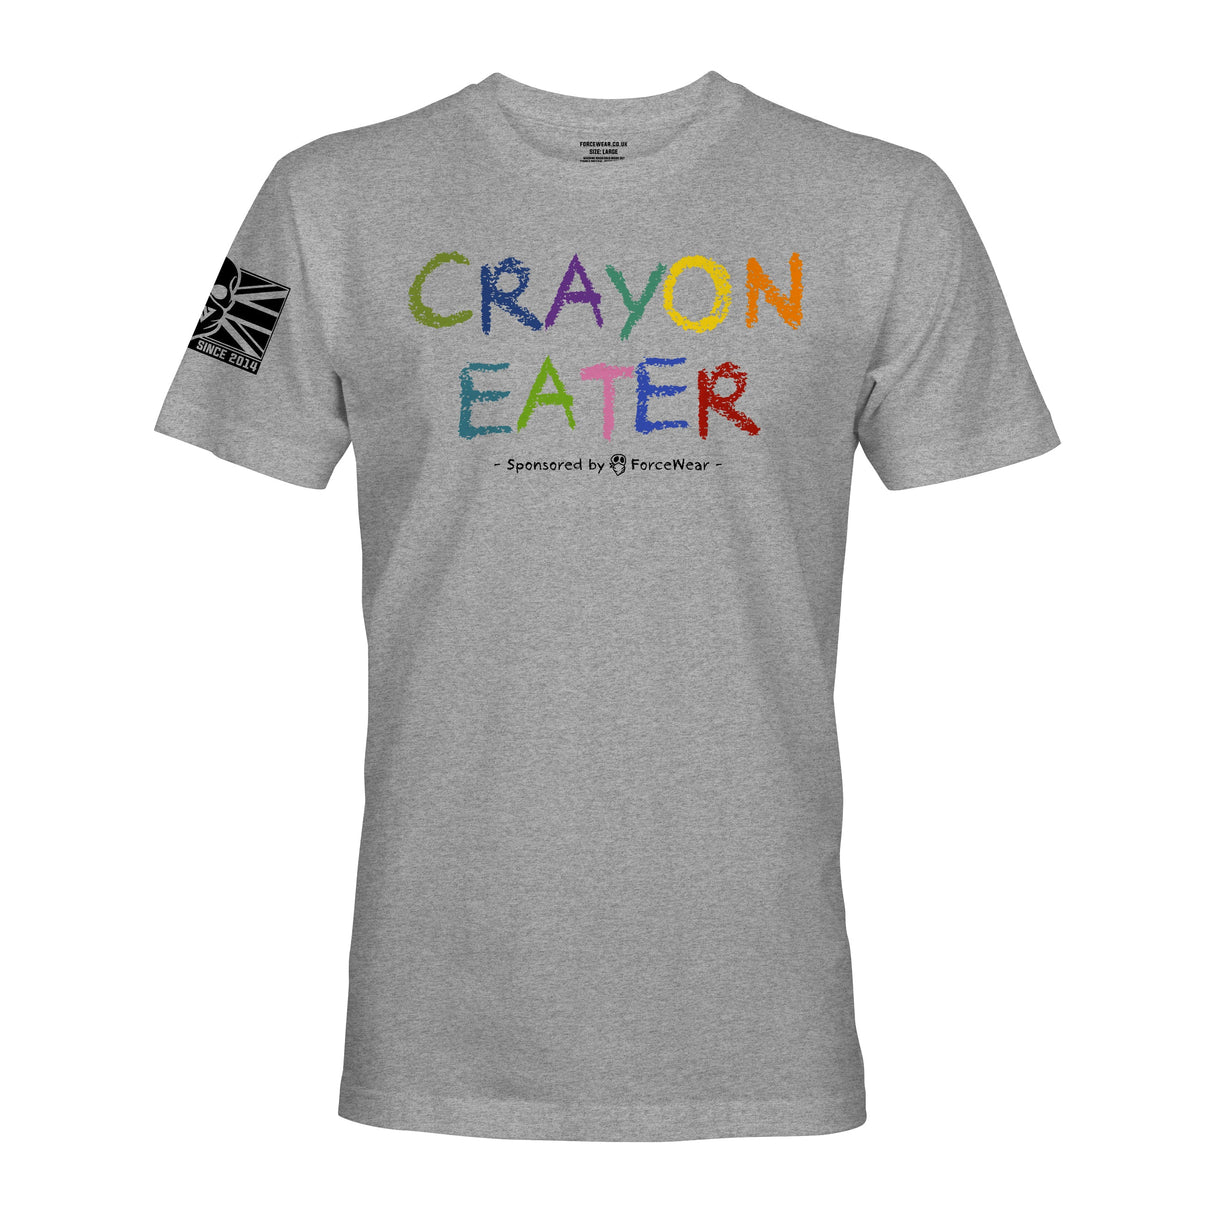 CRAYON EATER - Force Wear HQ - T-SHIRTS